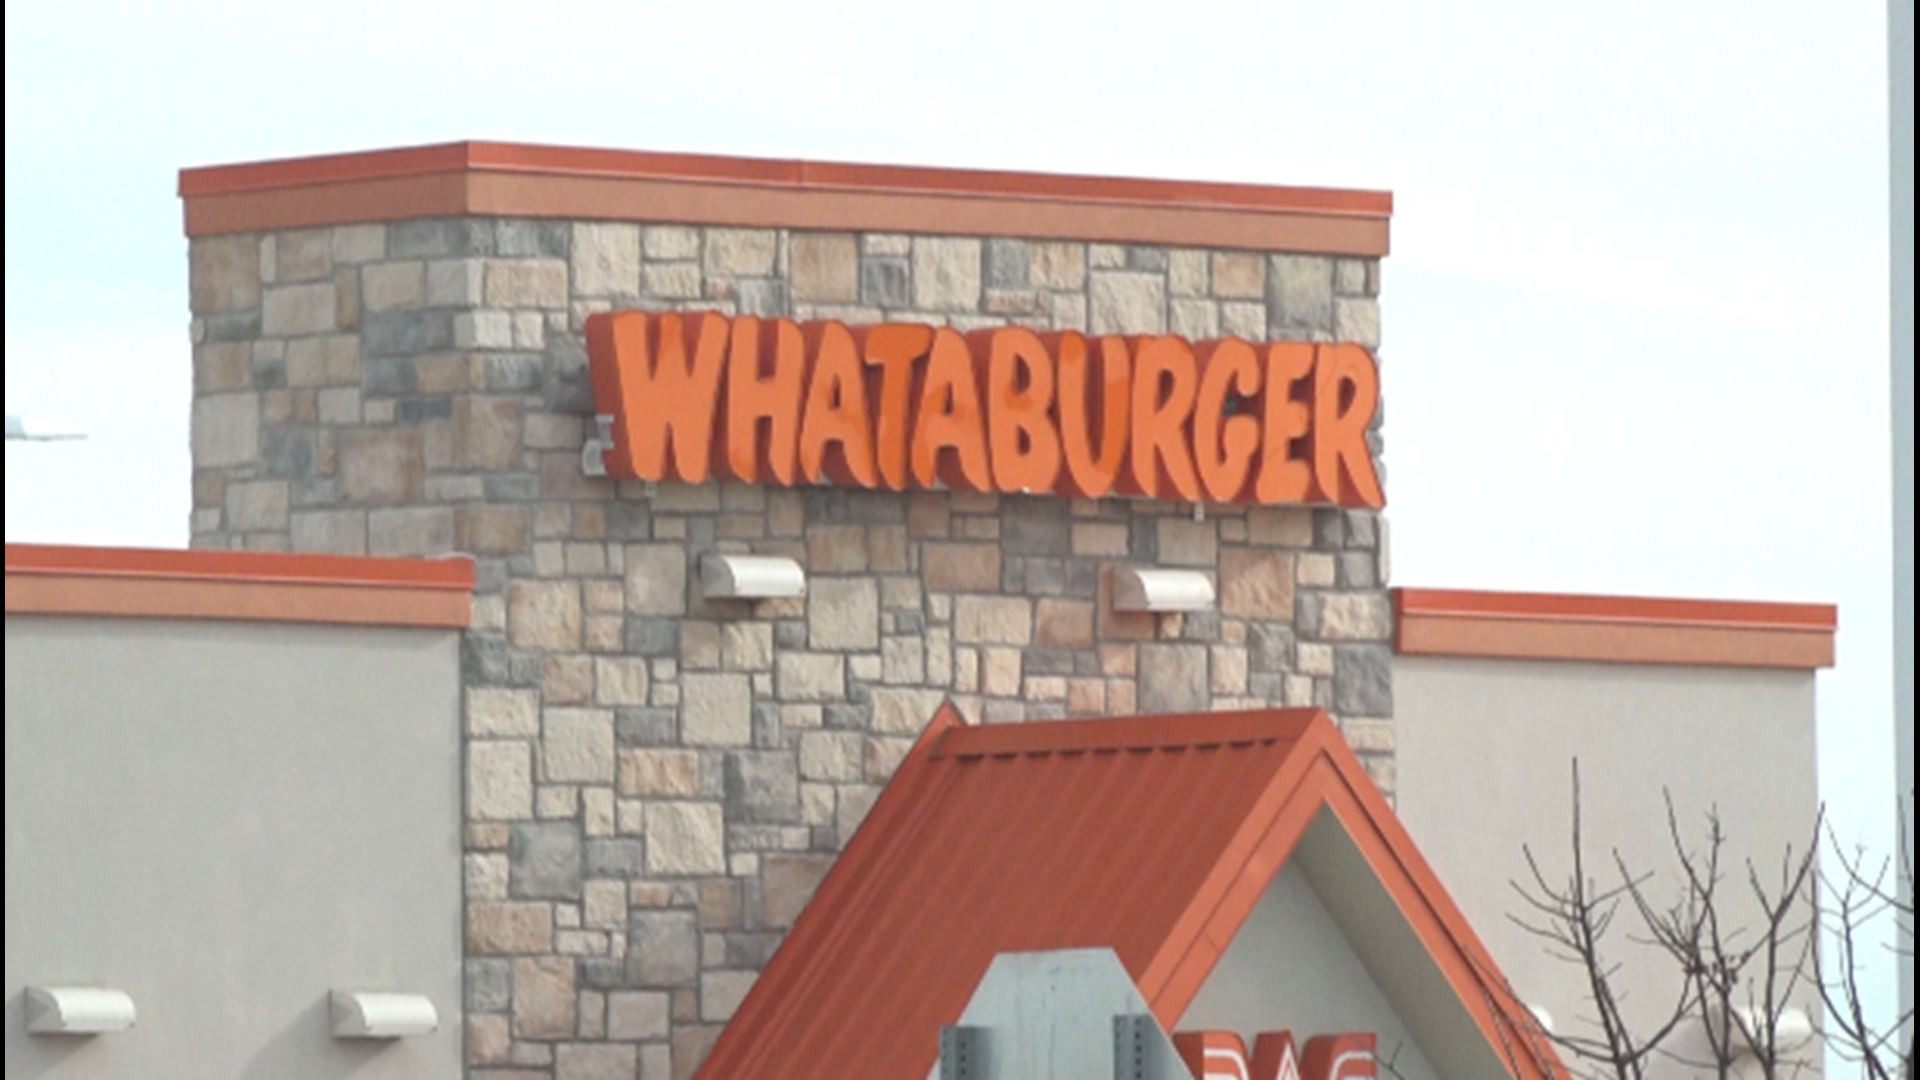 Temple police are still investigating after Susan Morey reported a 16-year-old working at Whataburger stole her credit card information.